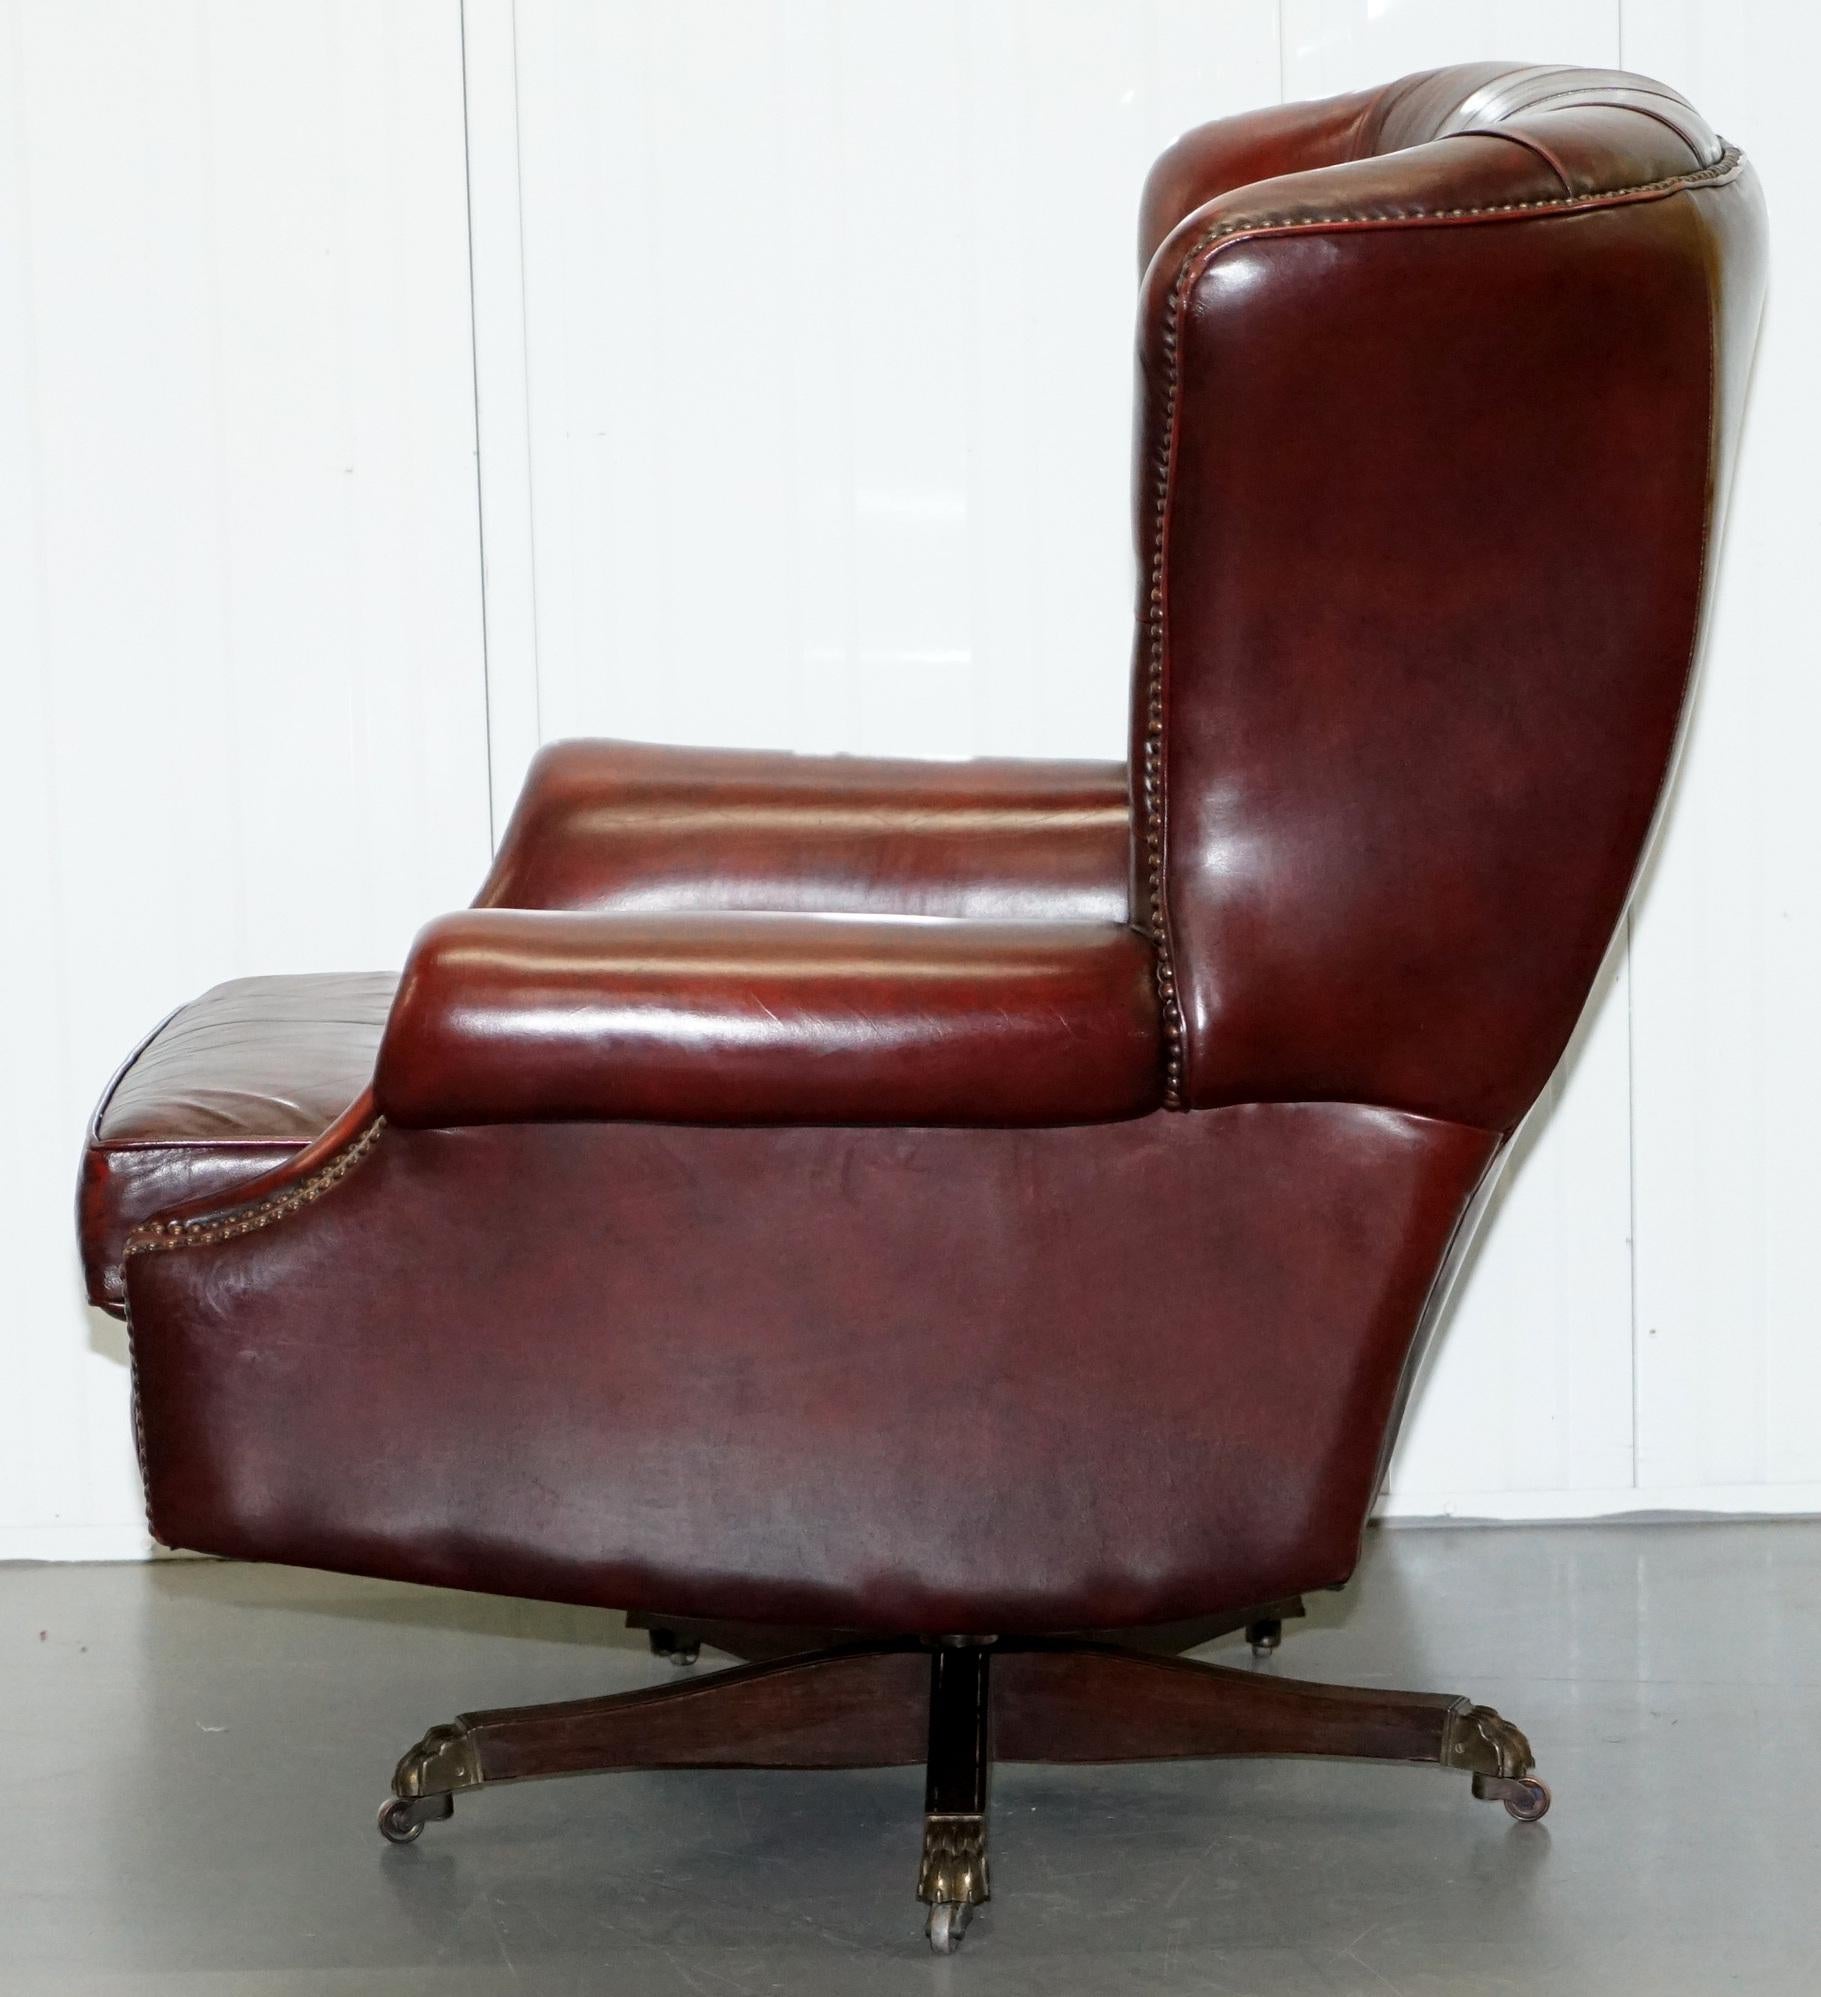 Harrods Oversized Oxblood Leather Wingback Library Lounge Armchair & Ottoman 3